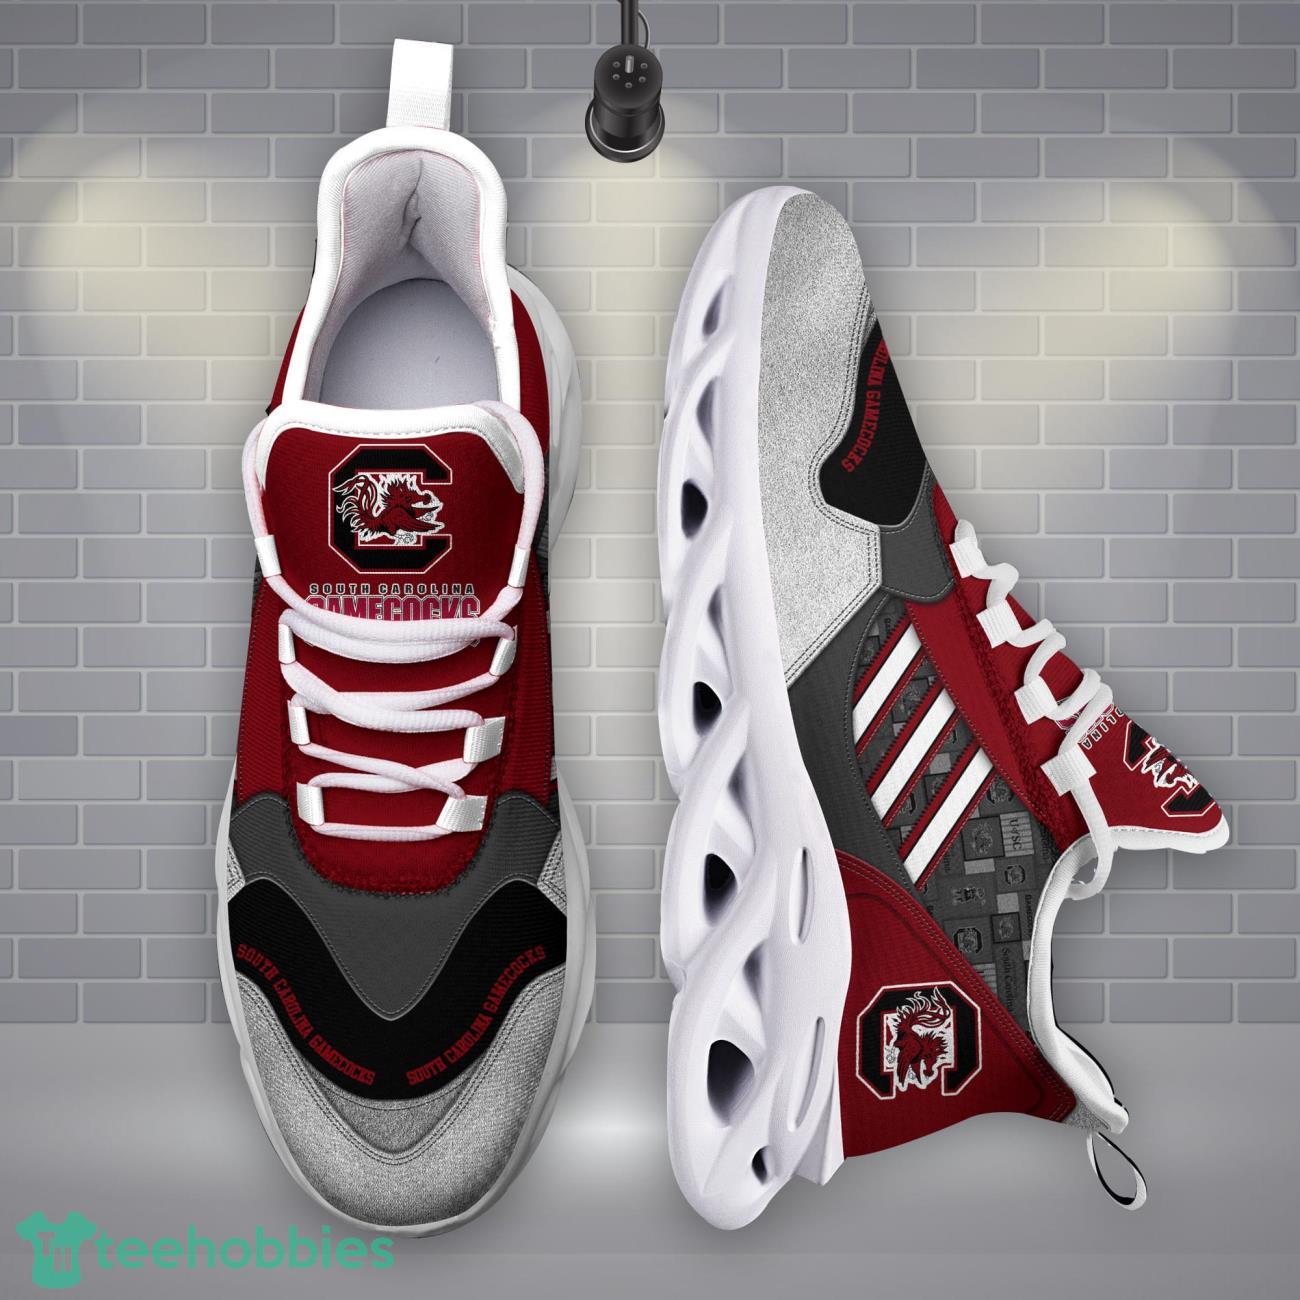 South Carolina Gamecocks NCAA1 Logo Sport Team Max Soul Shoes Clunky Running Sneakers Product Photo 1